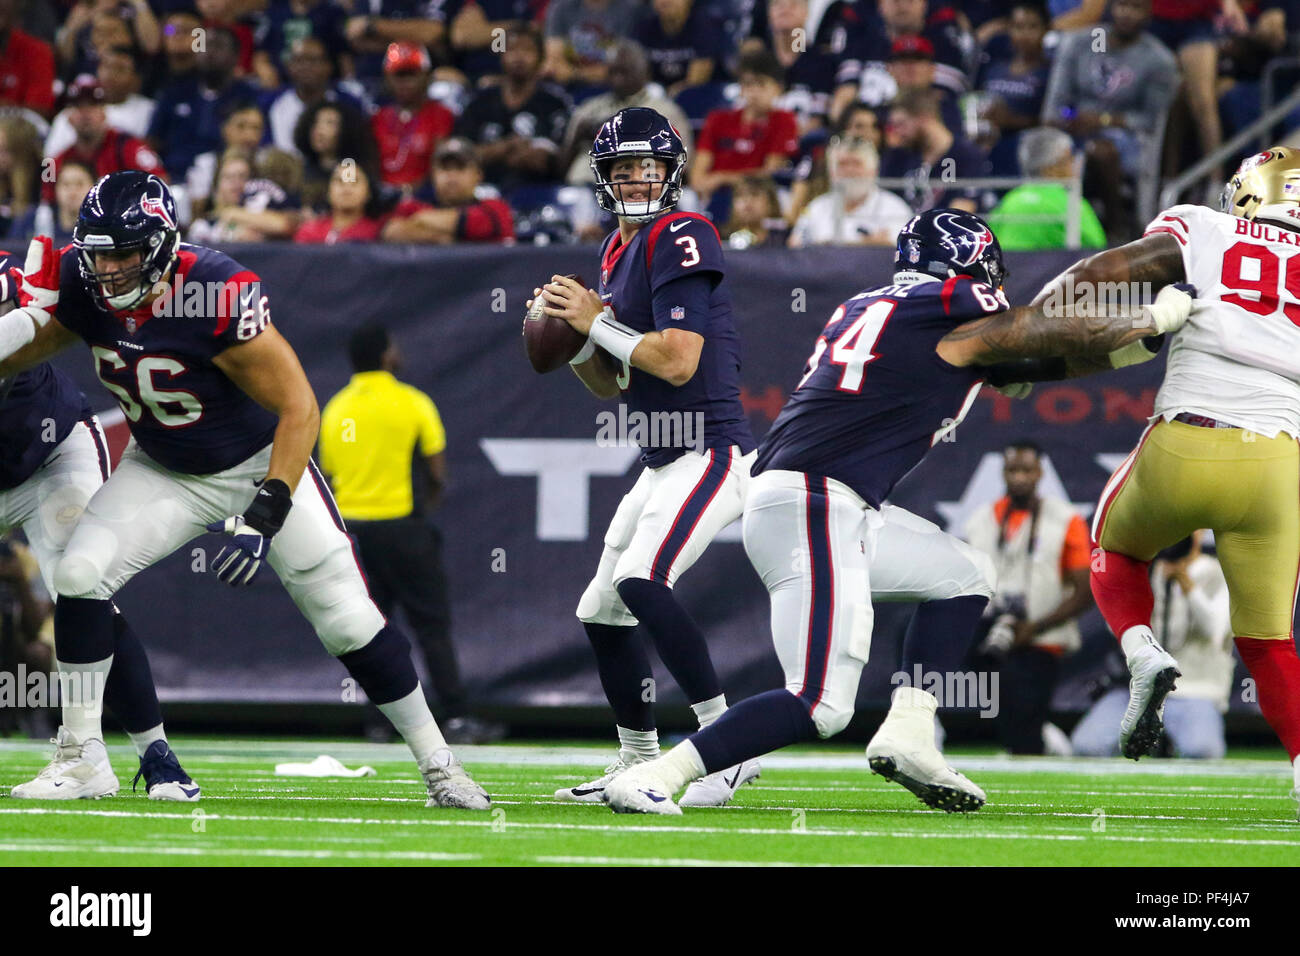 Houston, USA. 18 August 2018.  Houston Texans quarterback Brandon Weeden (3) drops back to pass during the second quarter of the preseason NFL football game between the Houston Texans and the San Francisco 49ers at NRG Stadium in Houston, TX. John Glaser/CSM Credit: Cal Sport Media/Alamy Live News Stock Photo